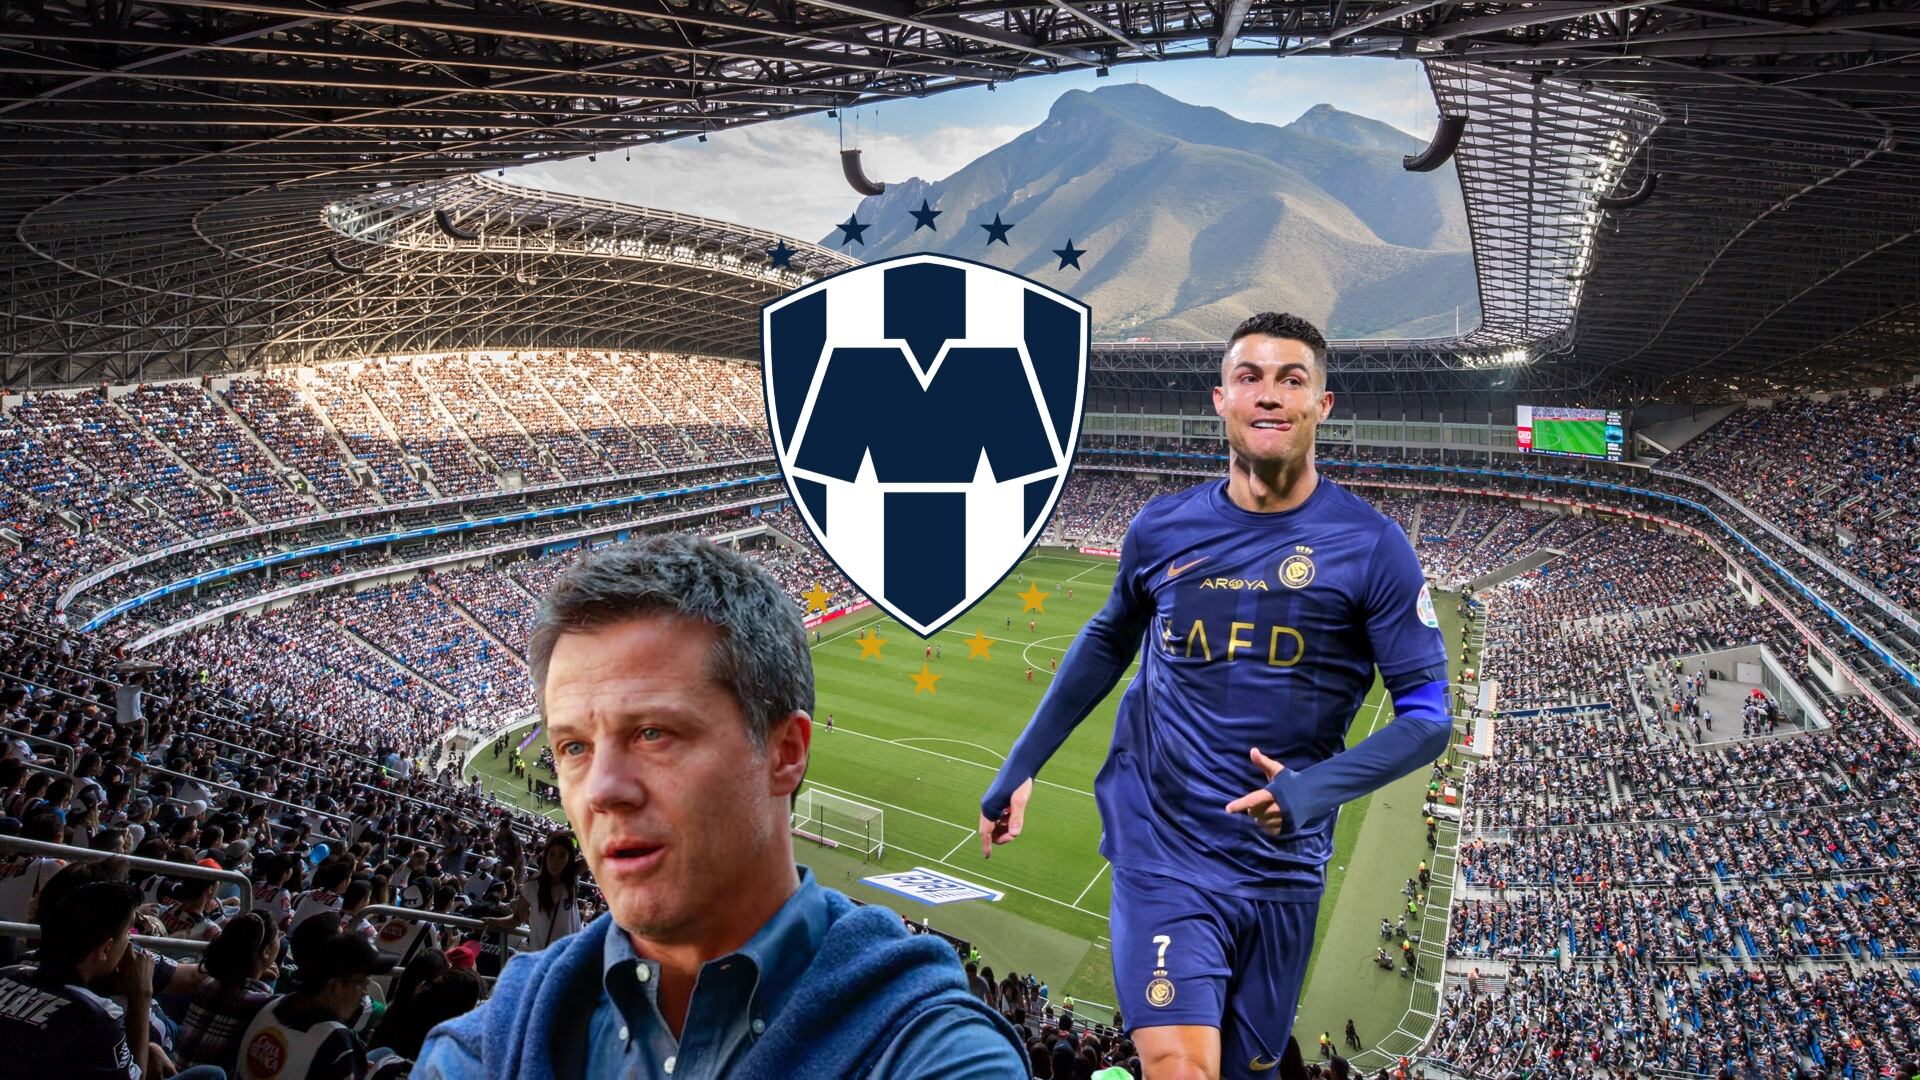 (VIDEO) They asked him about Cristiano, Rayados president's answer to the fans who want CR7 at Monterrey 